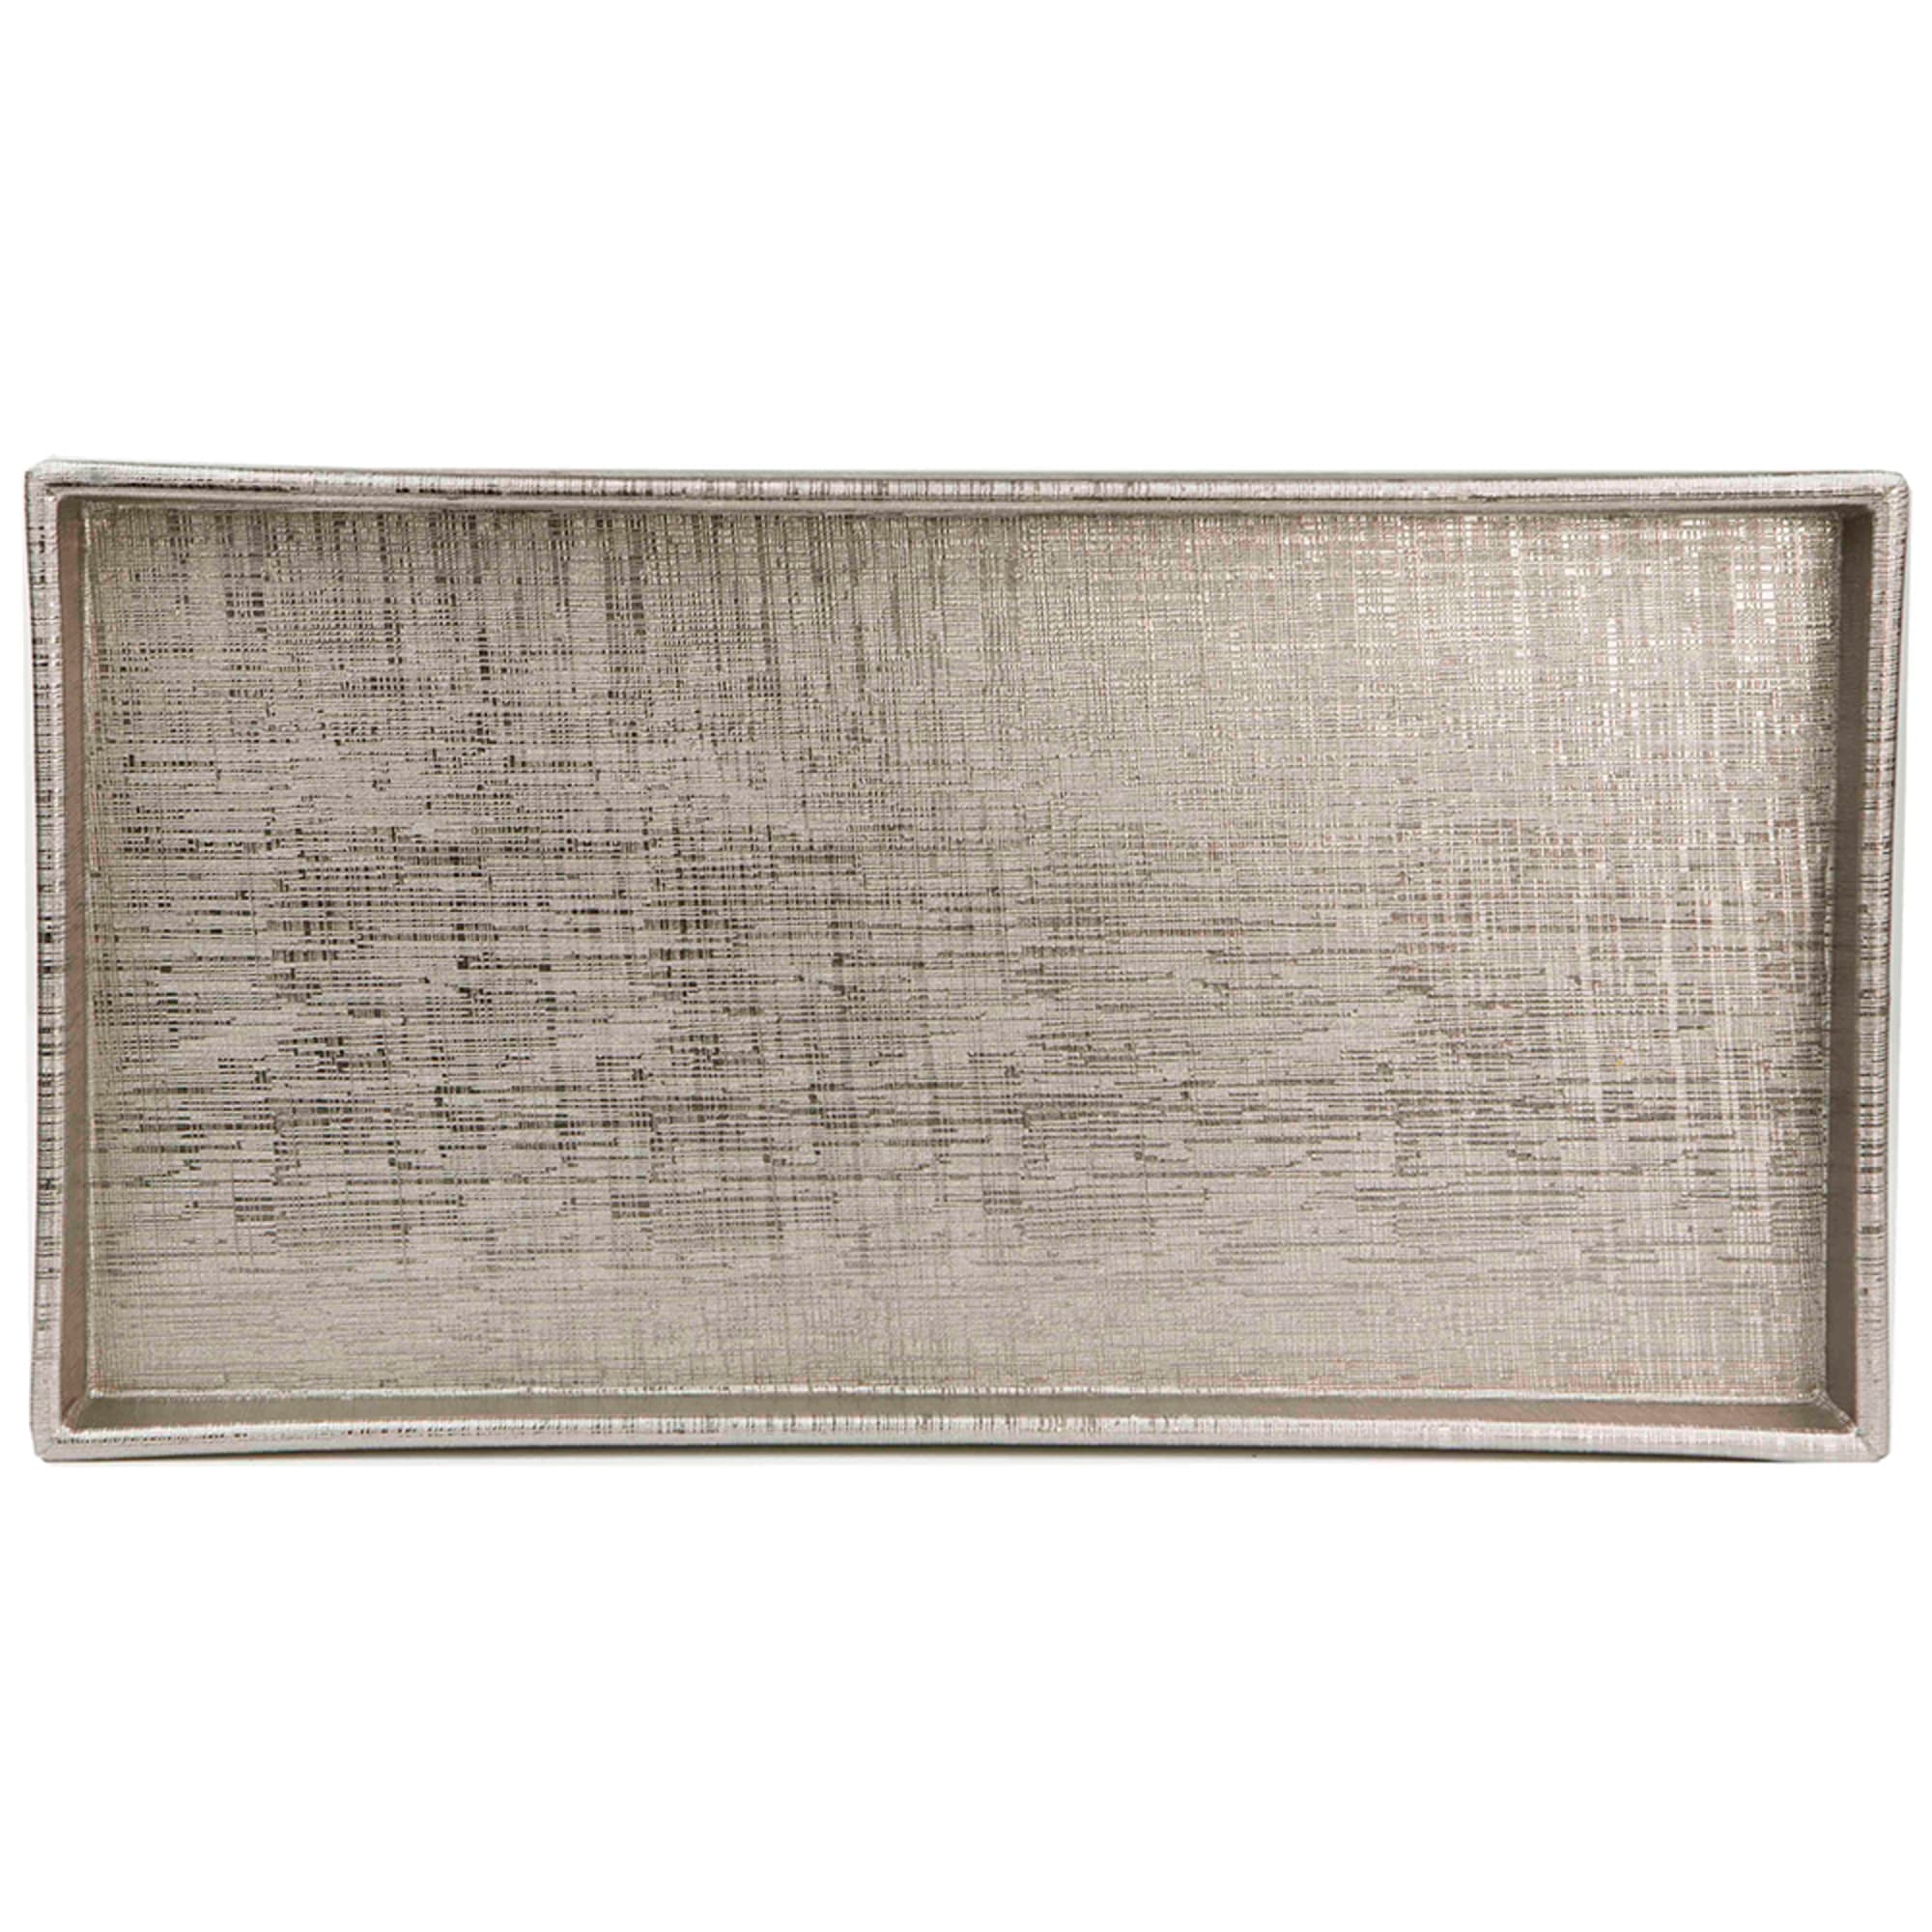 Home Basics Plastic Metallic Vanity Tray, Champagne $5.00 EACH, CASE PACK OF 8